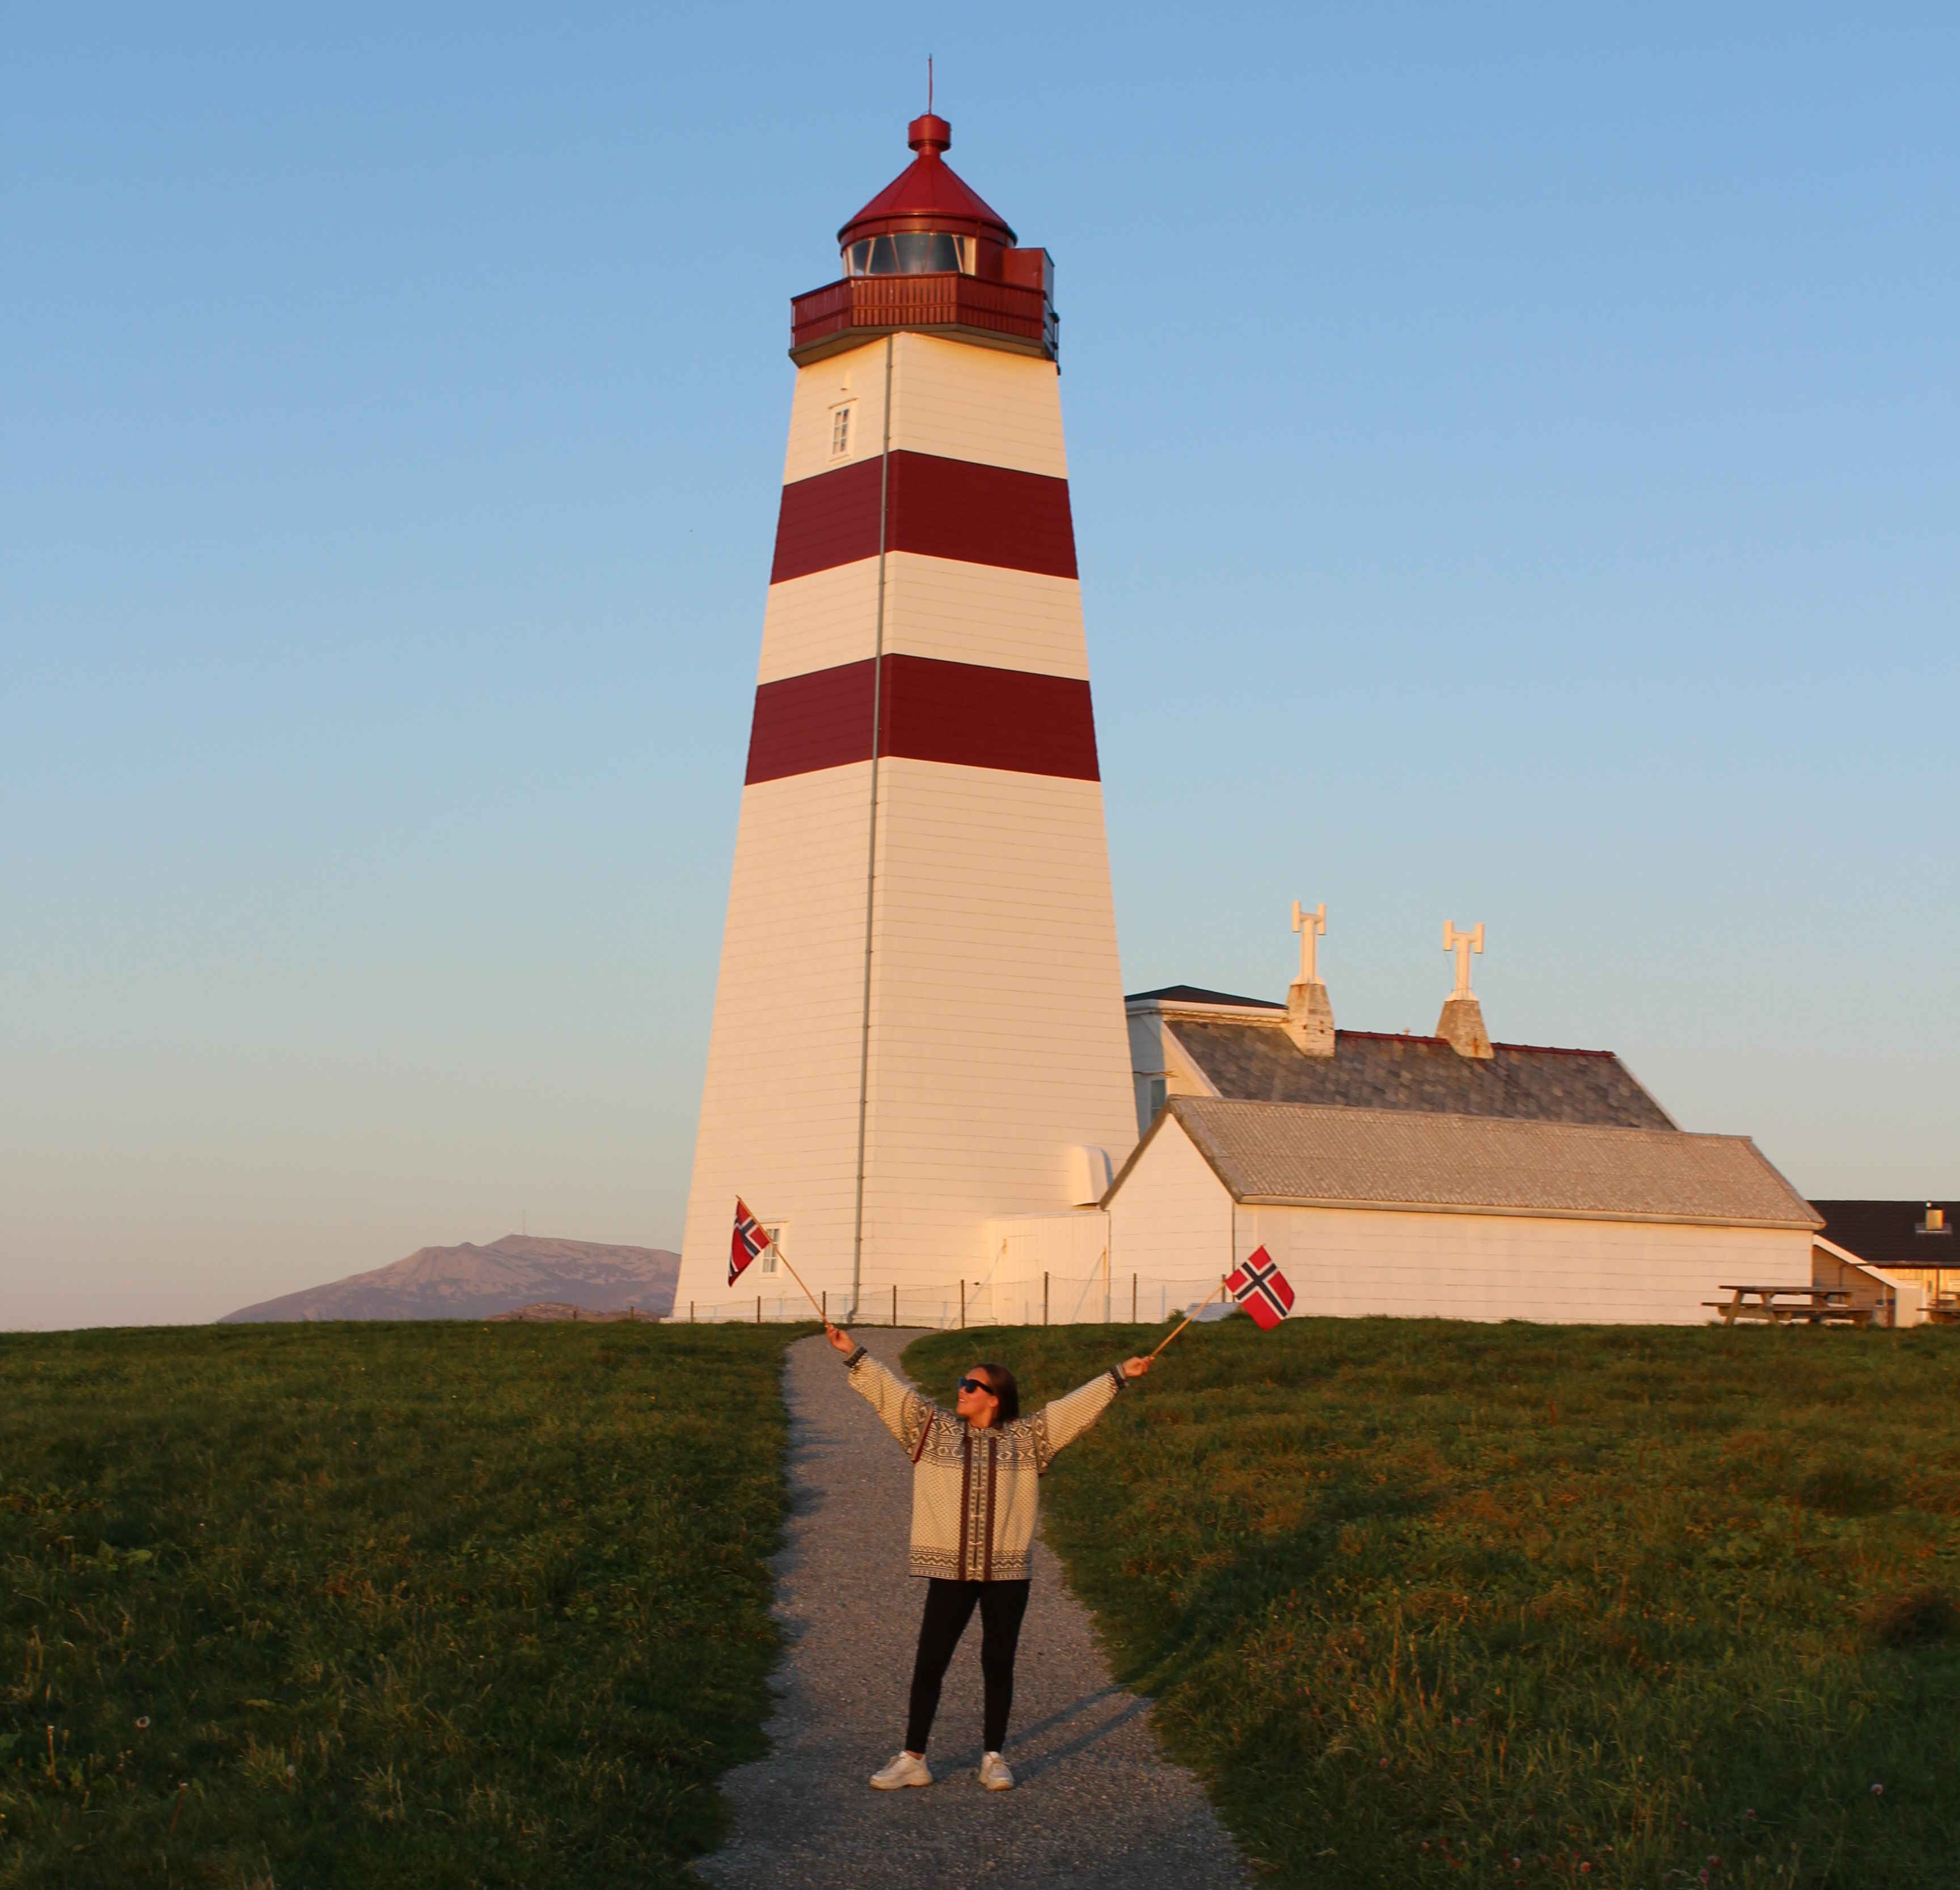 Image showing the Alnes Lighthouse in the background and a woman standing in front holding two Norwegian flags, one in each hand.